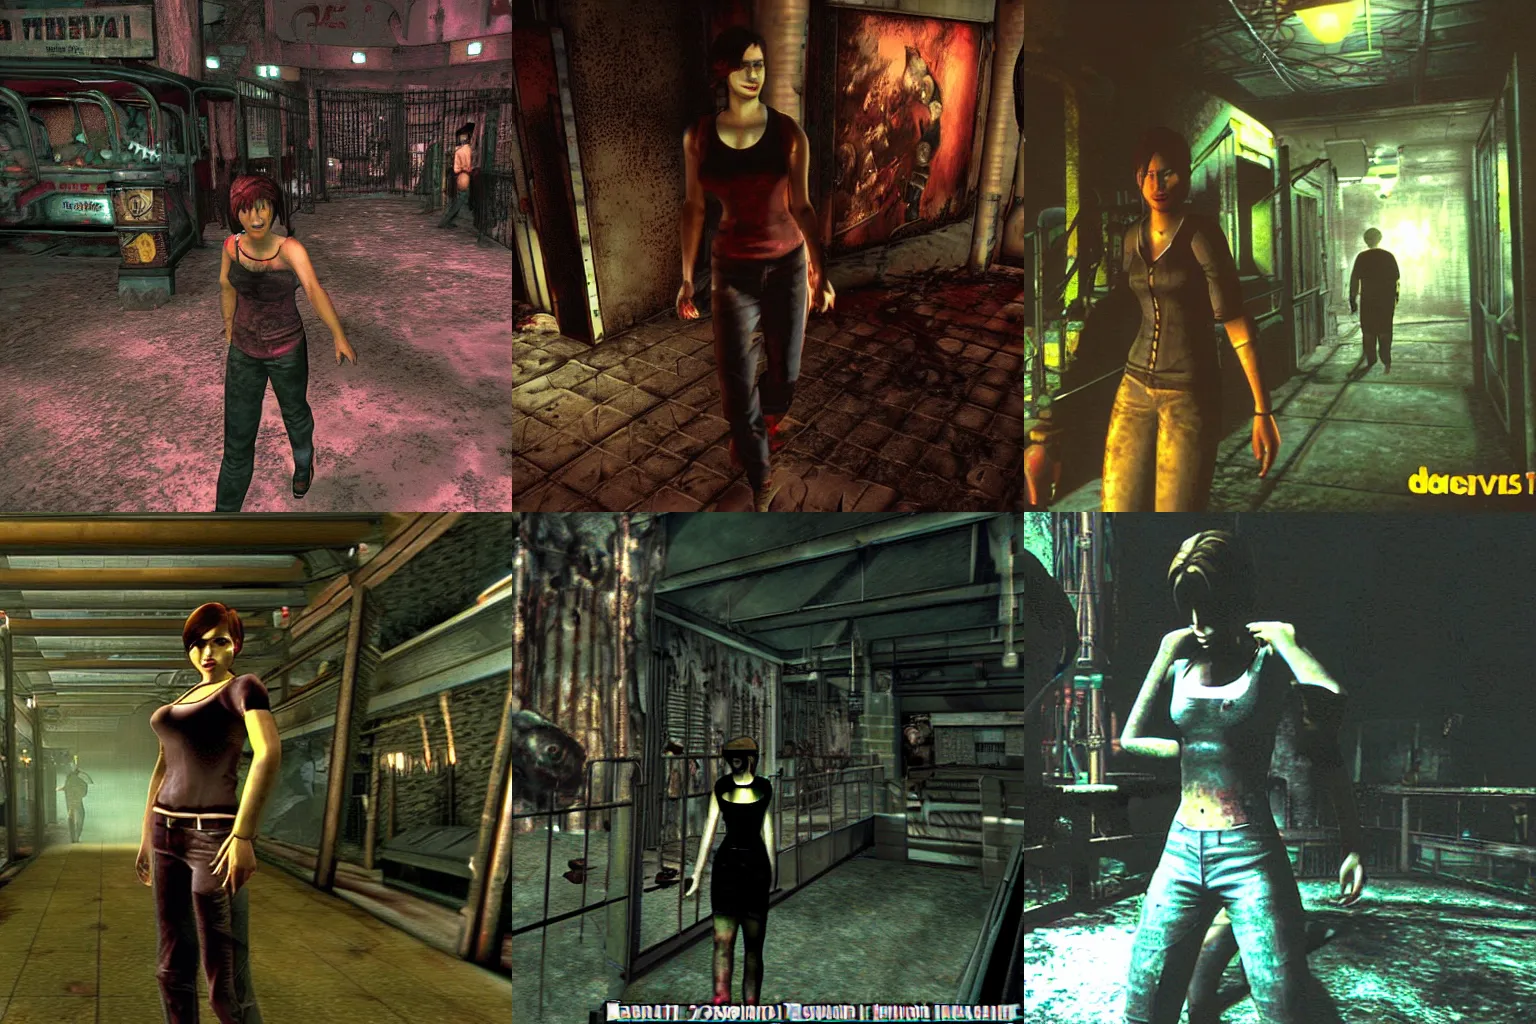 Dryfield, Parasite Eve 2 Remake, Stable Diffusion